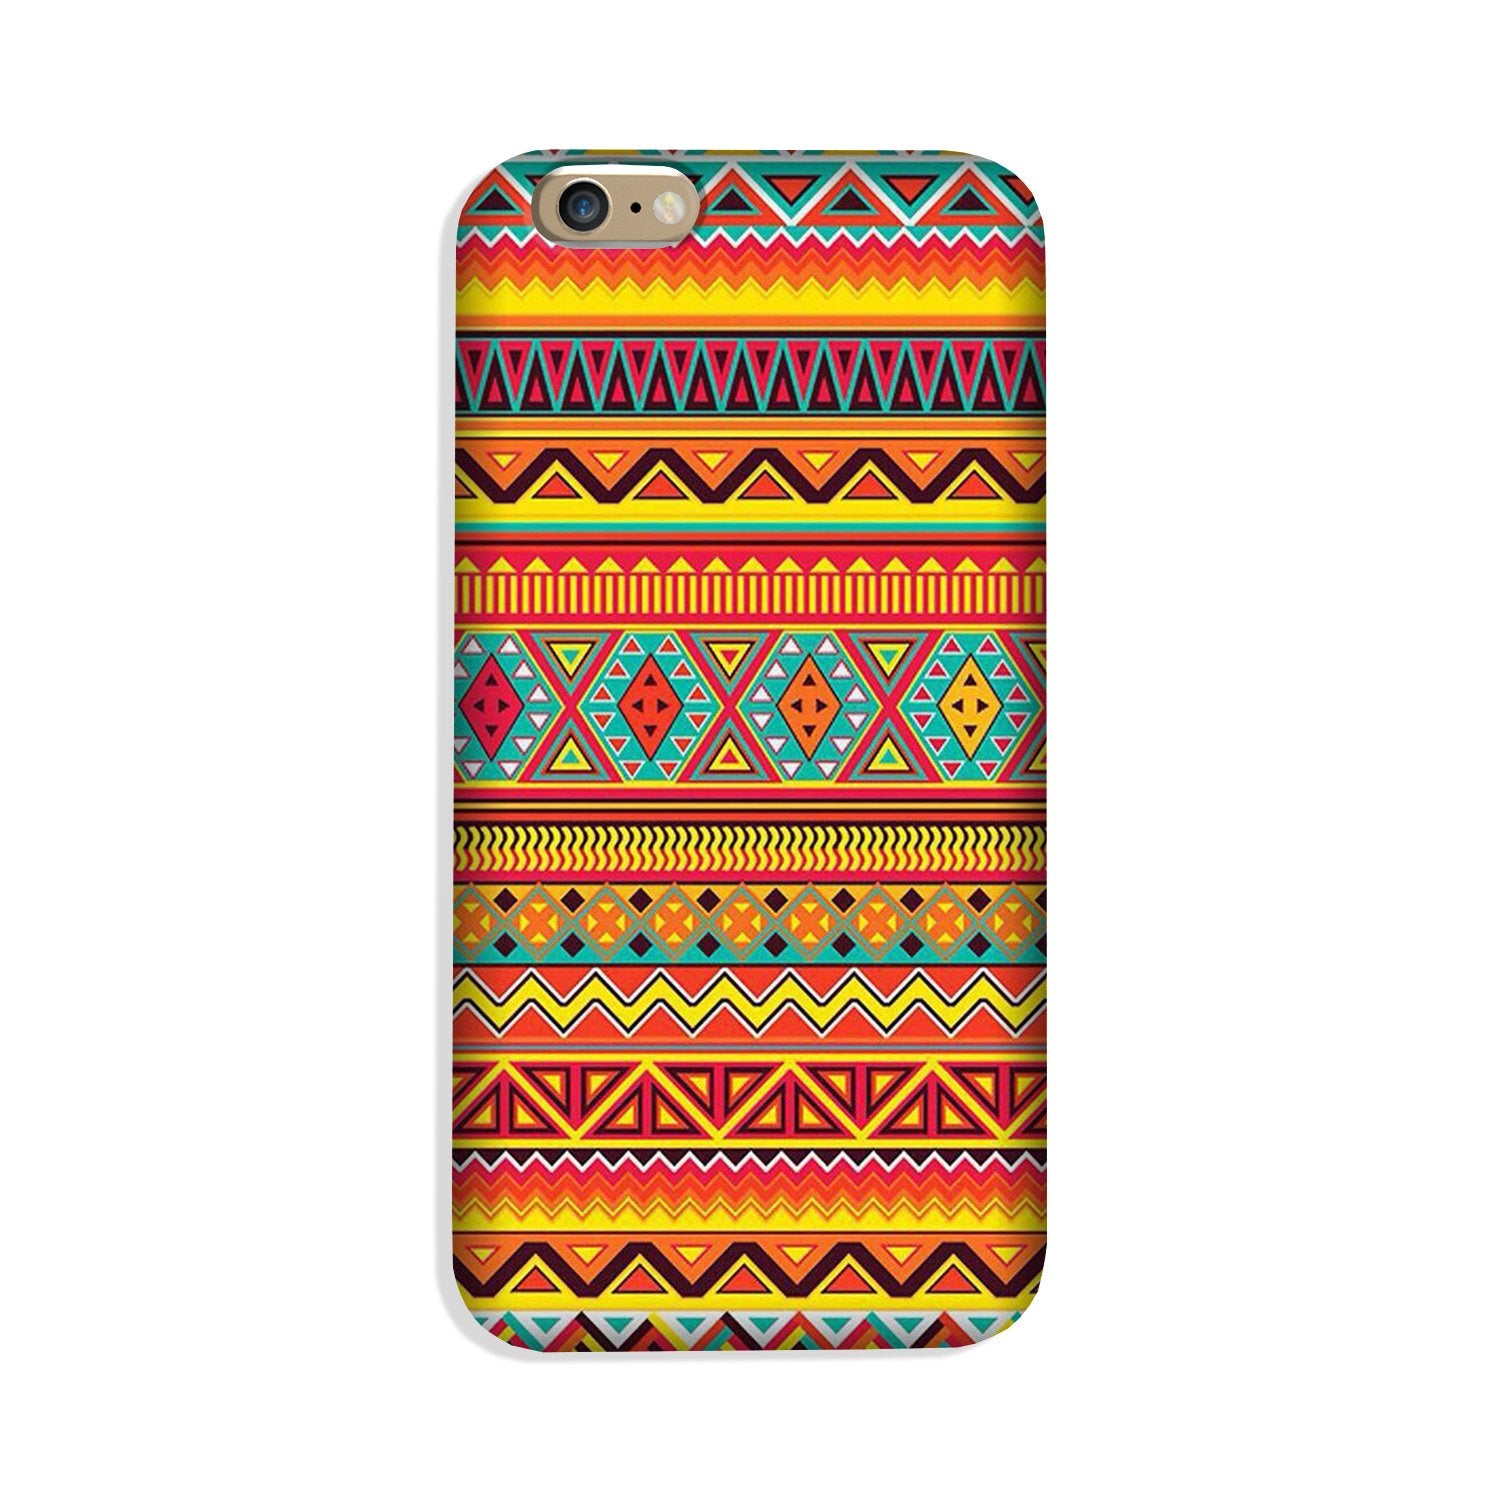 Zigzag line pattern Case for iPhone 8